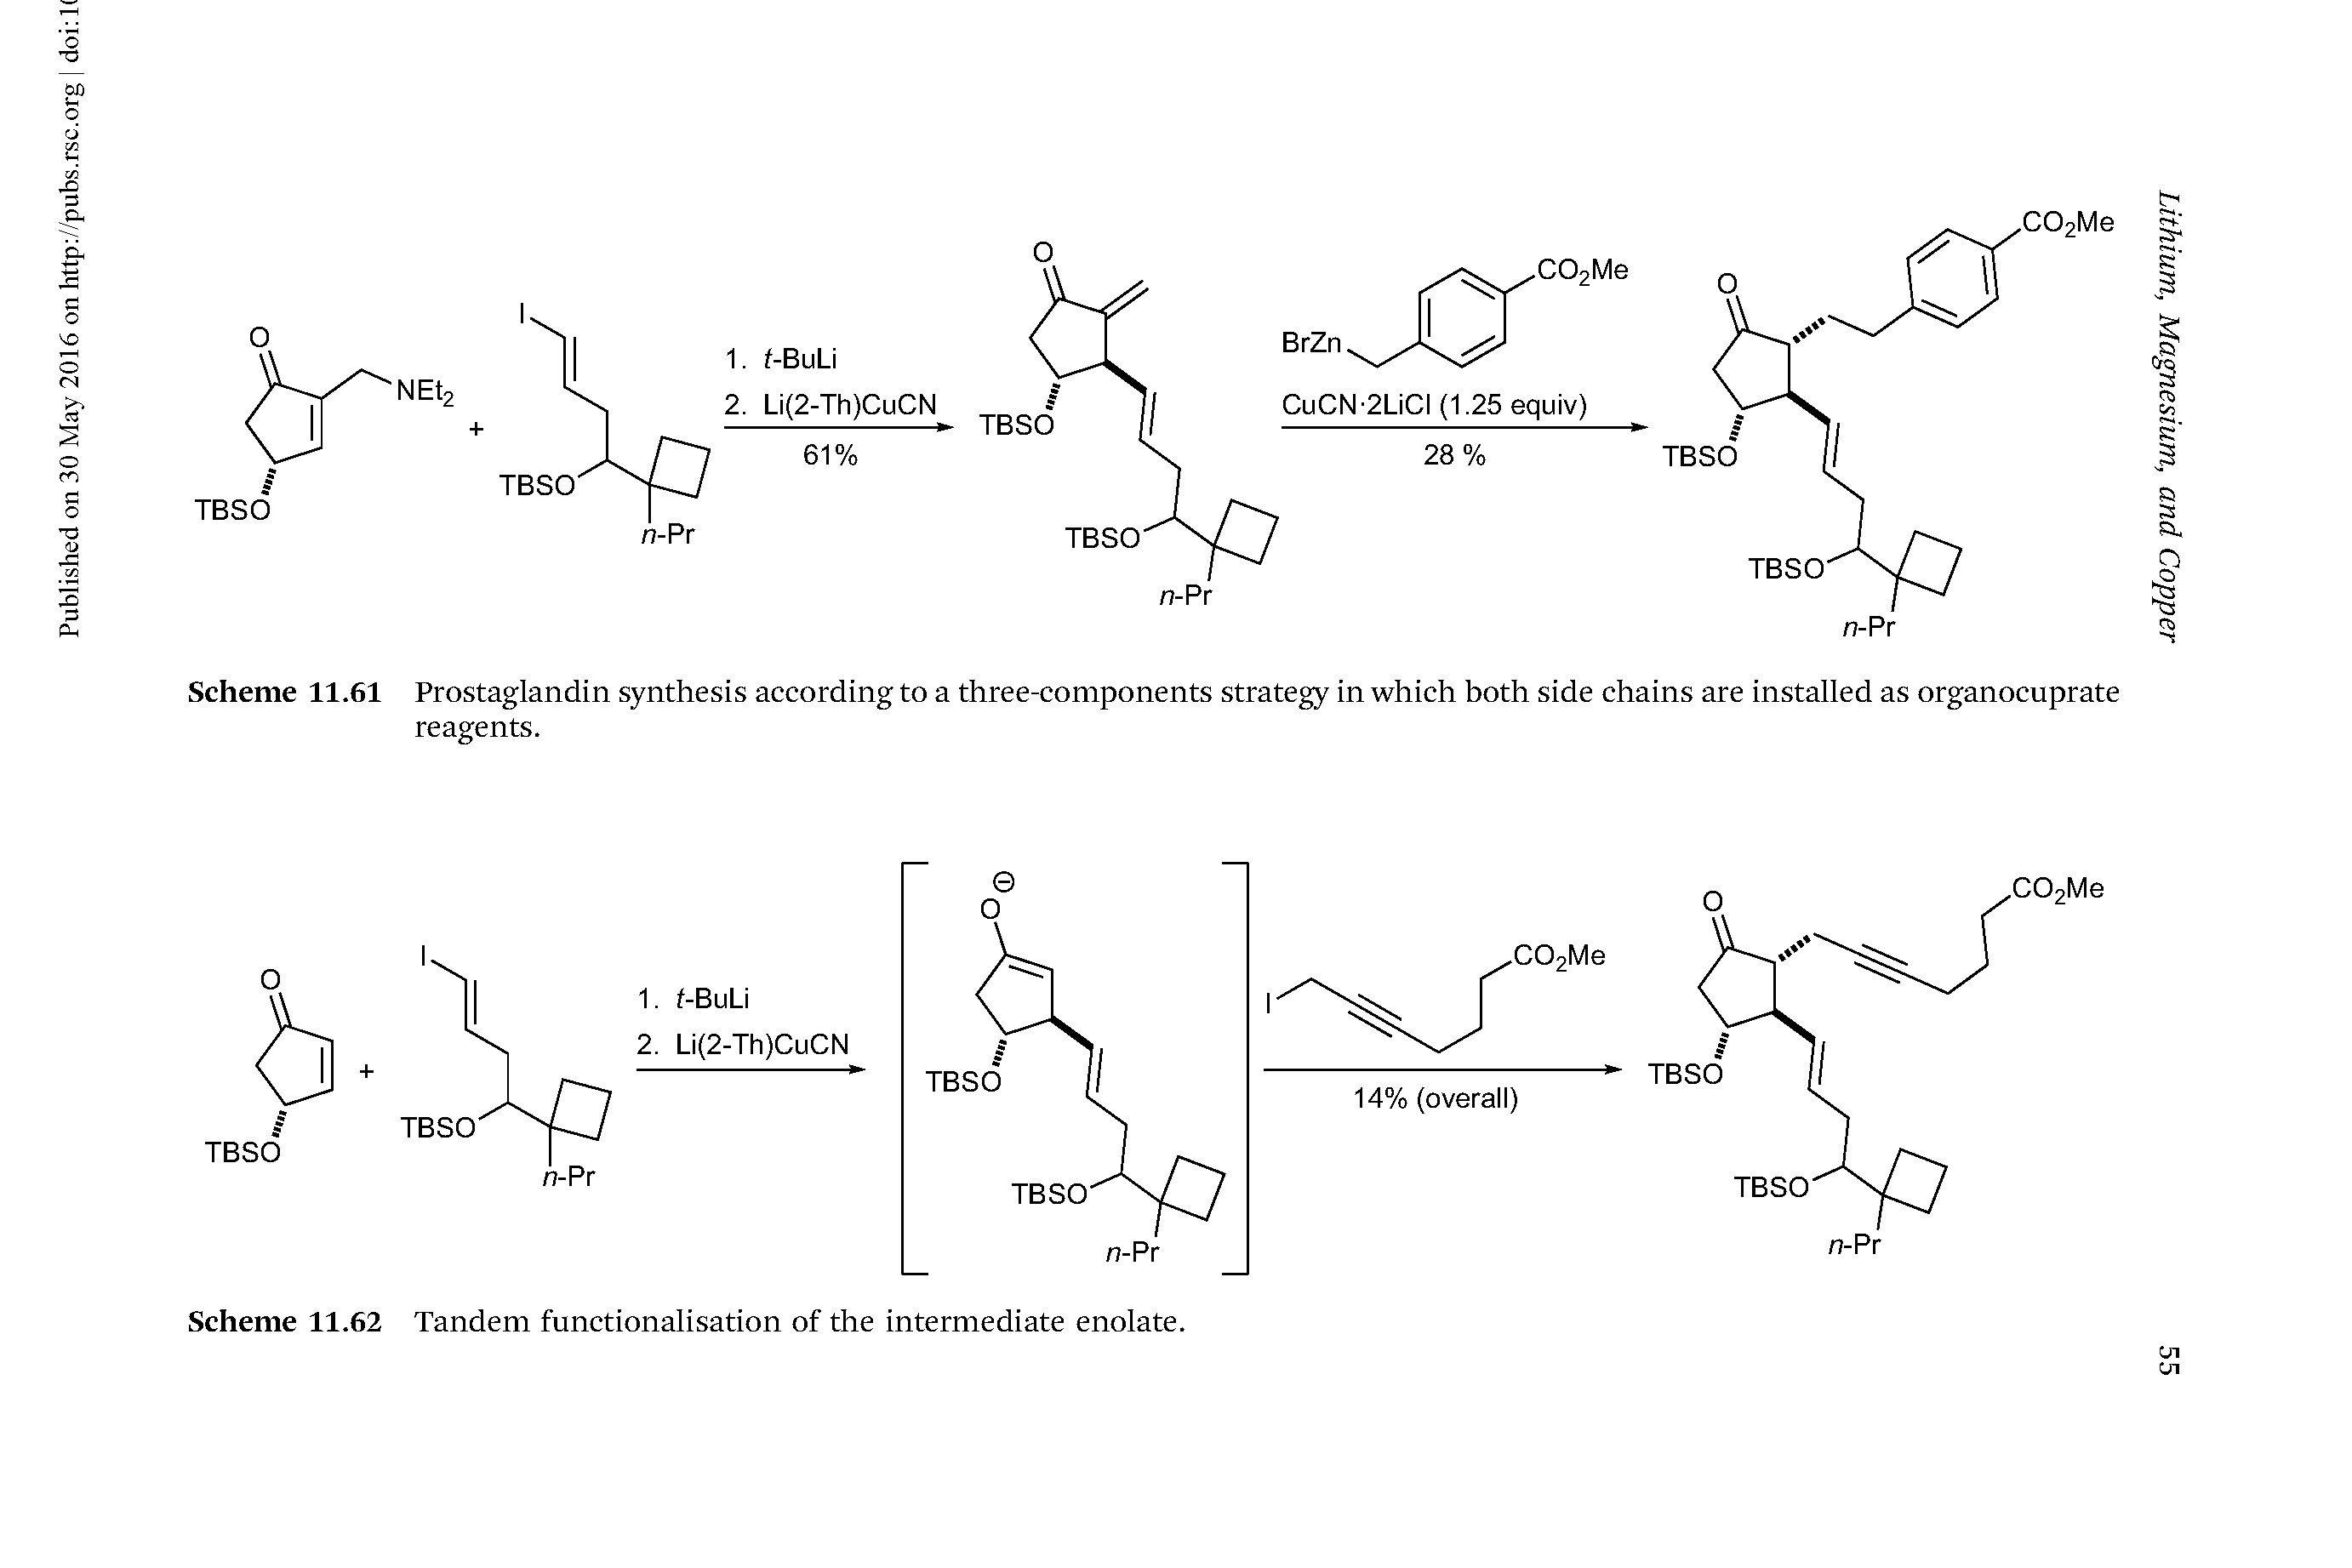 Scheme 11.61 Prostaglandin synthesis according to a three-components strategy in which both side chains are installed as organocuprate reagents.